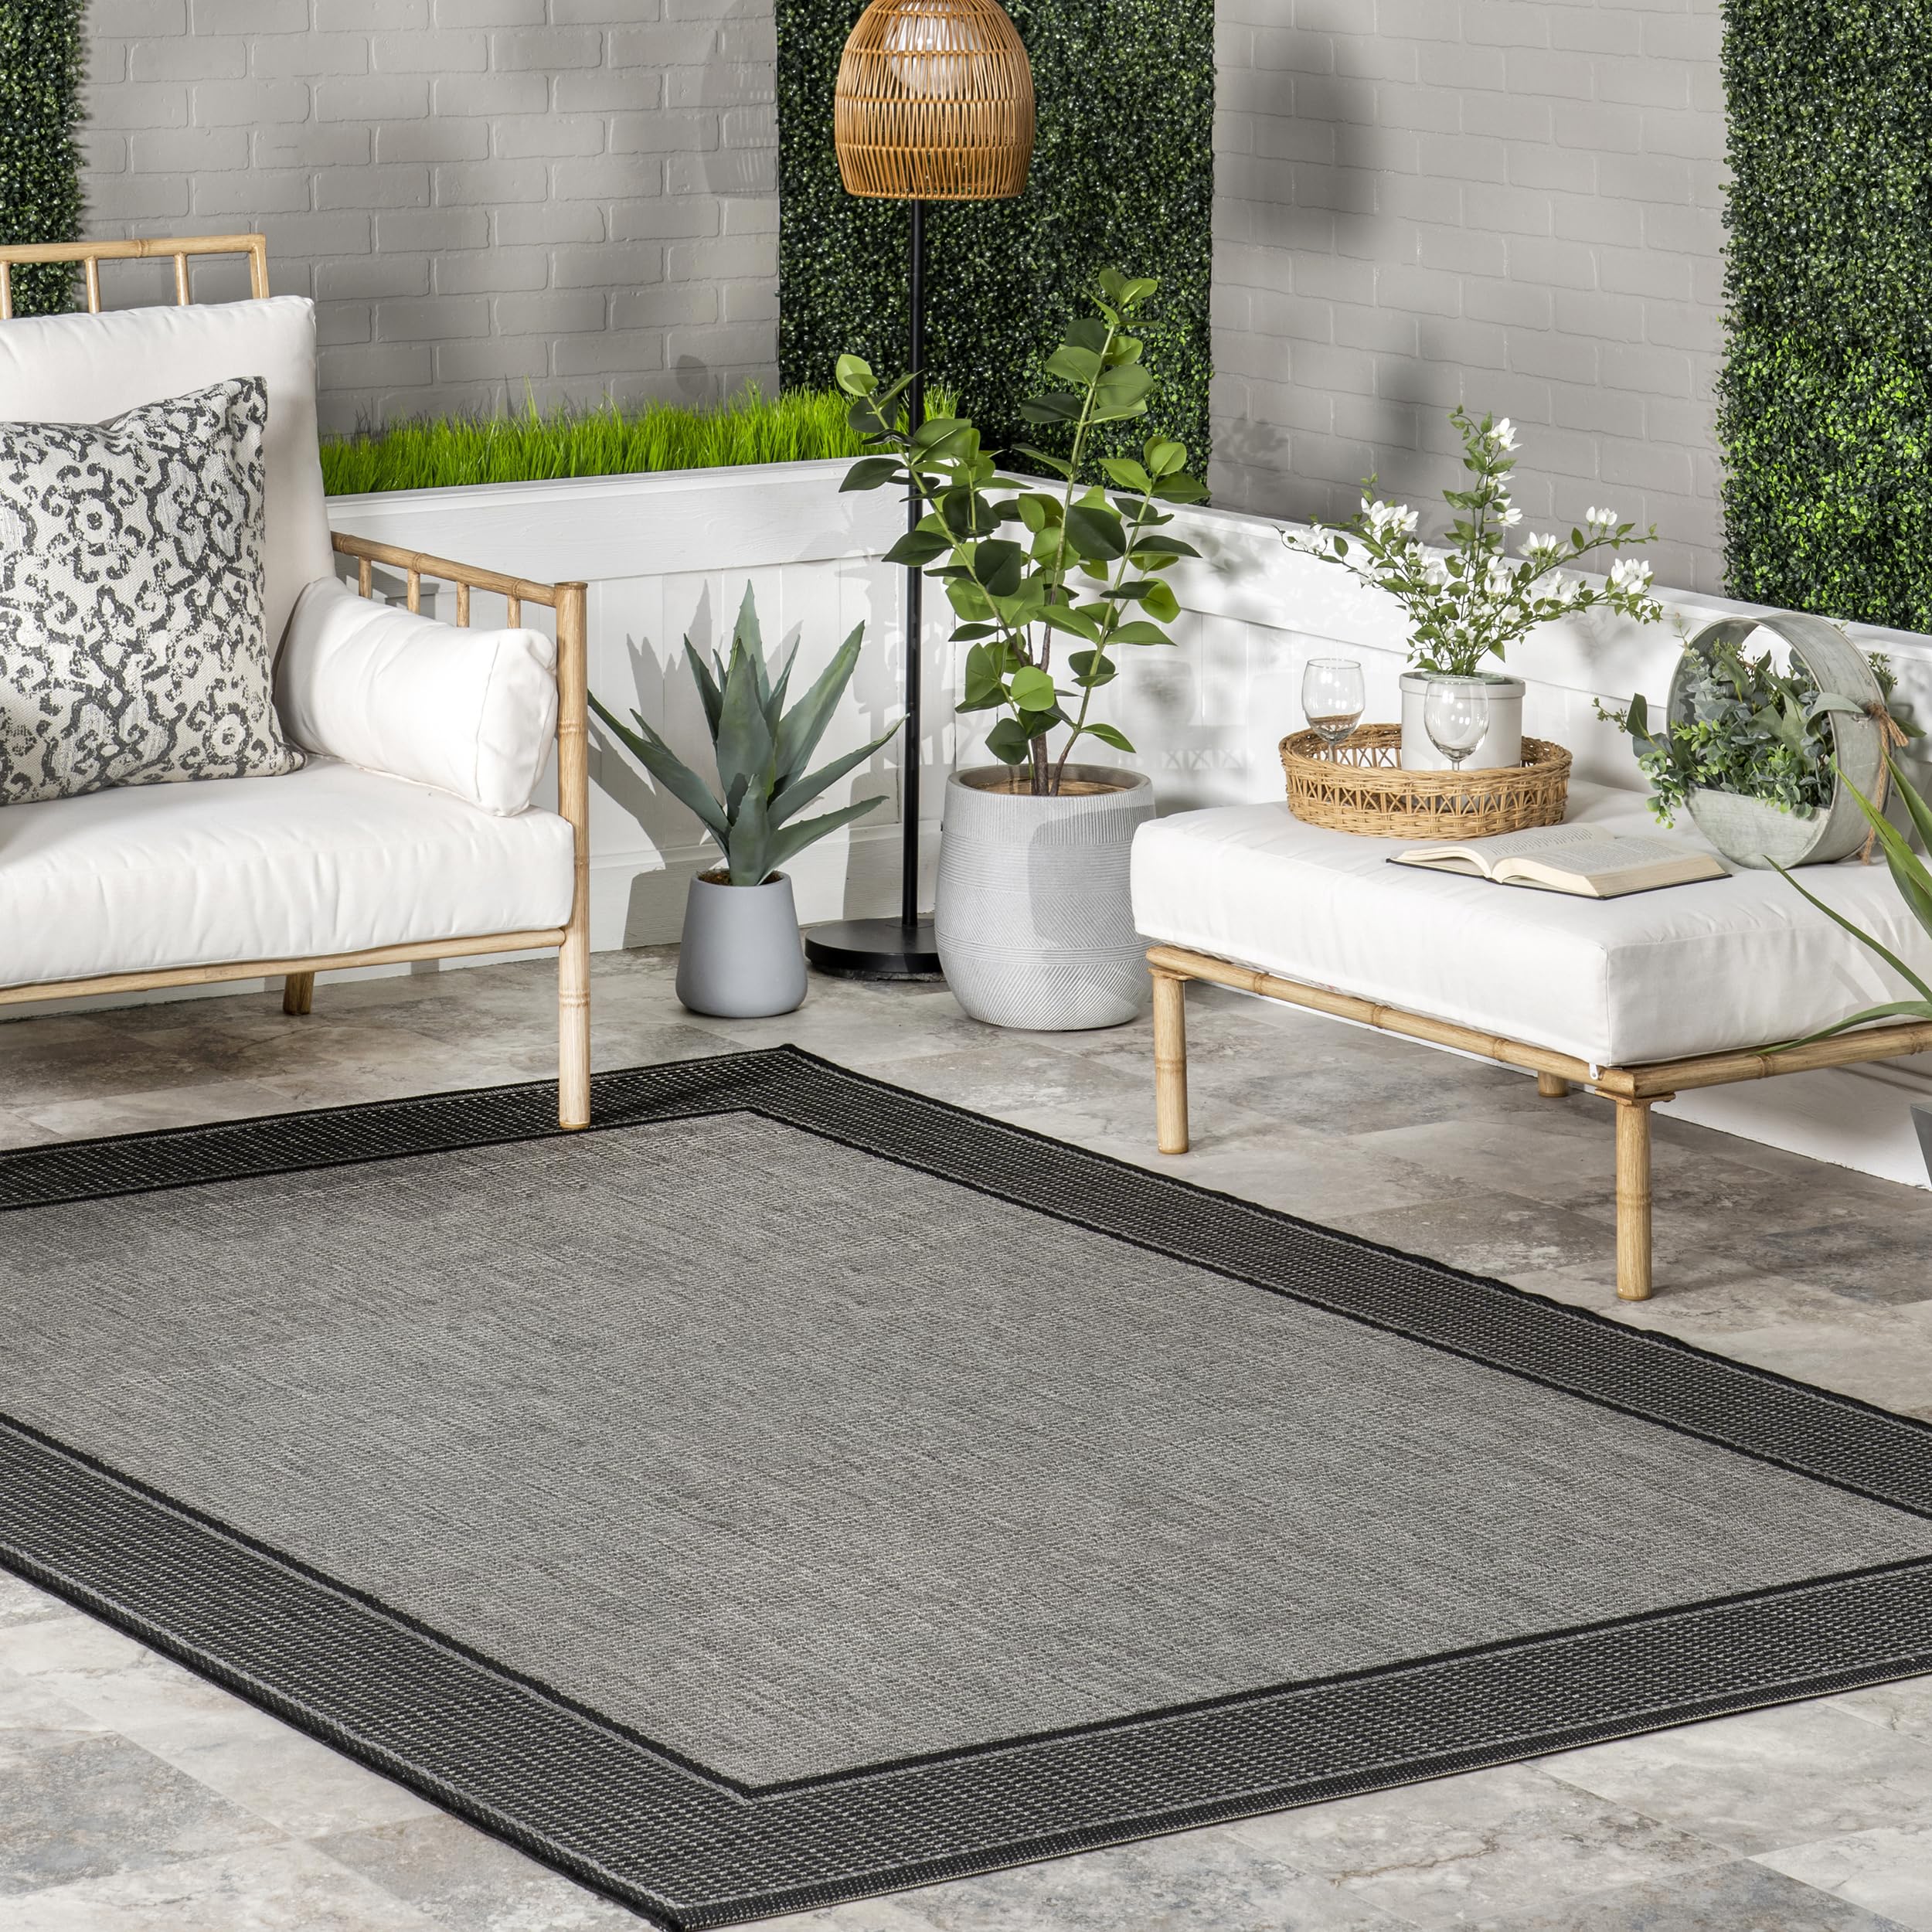 nuLOOM Gris Bordered 3x5 Indoor/Outdoor Accent Rug for Living Room Patio Deck Front Porch Entryway Kitchen, Grey/Black